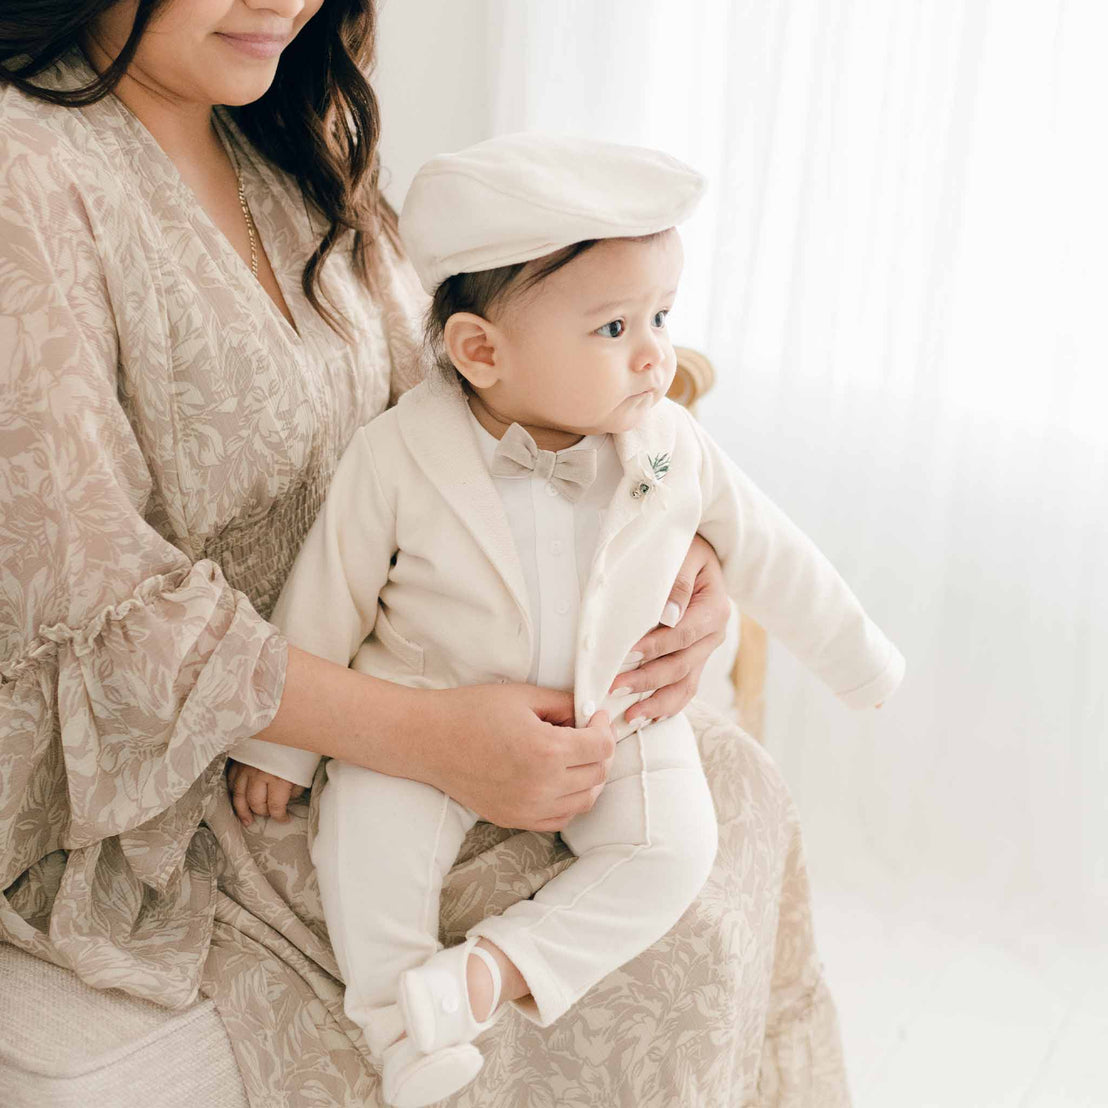 Baby boy and Mom in christening suit and newsboy cap